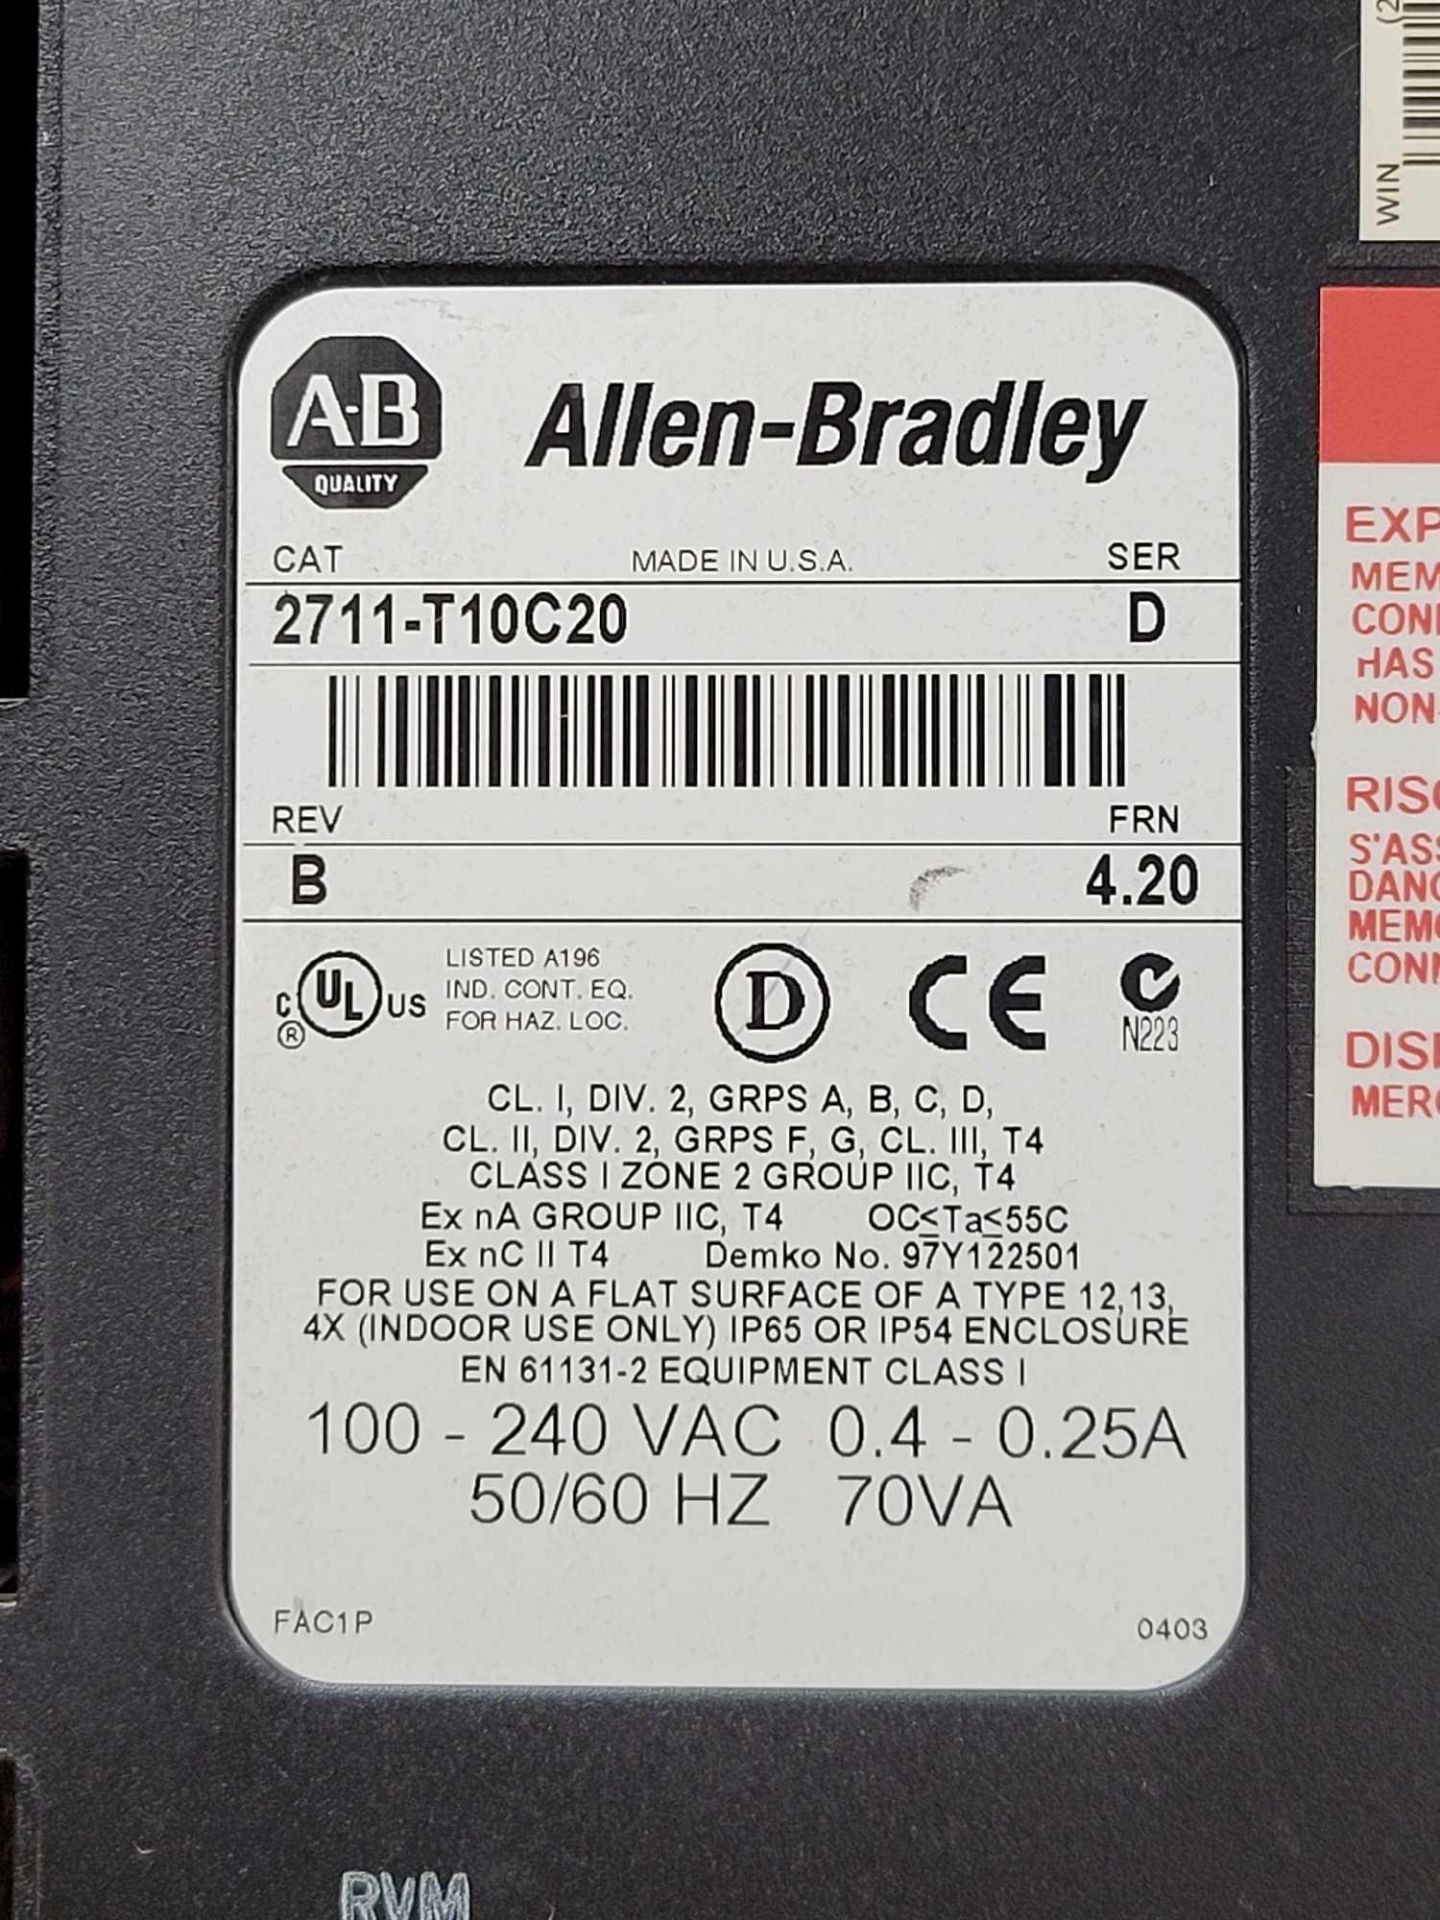 ALLEN BRADLEY 2711-T10C20 / Series D PanelView 1000 Operator Interface  /  Lot Weight: 6.6 lbs - Image 3 of 5